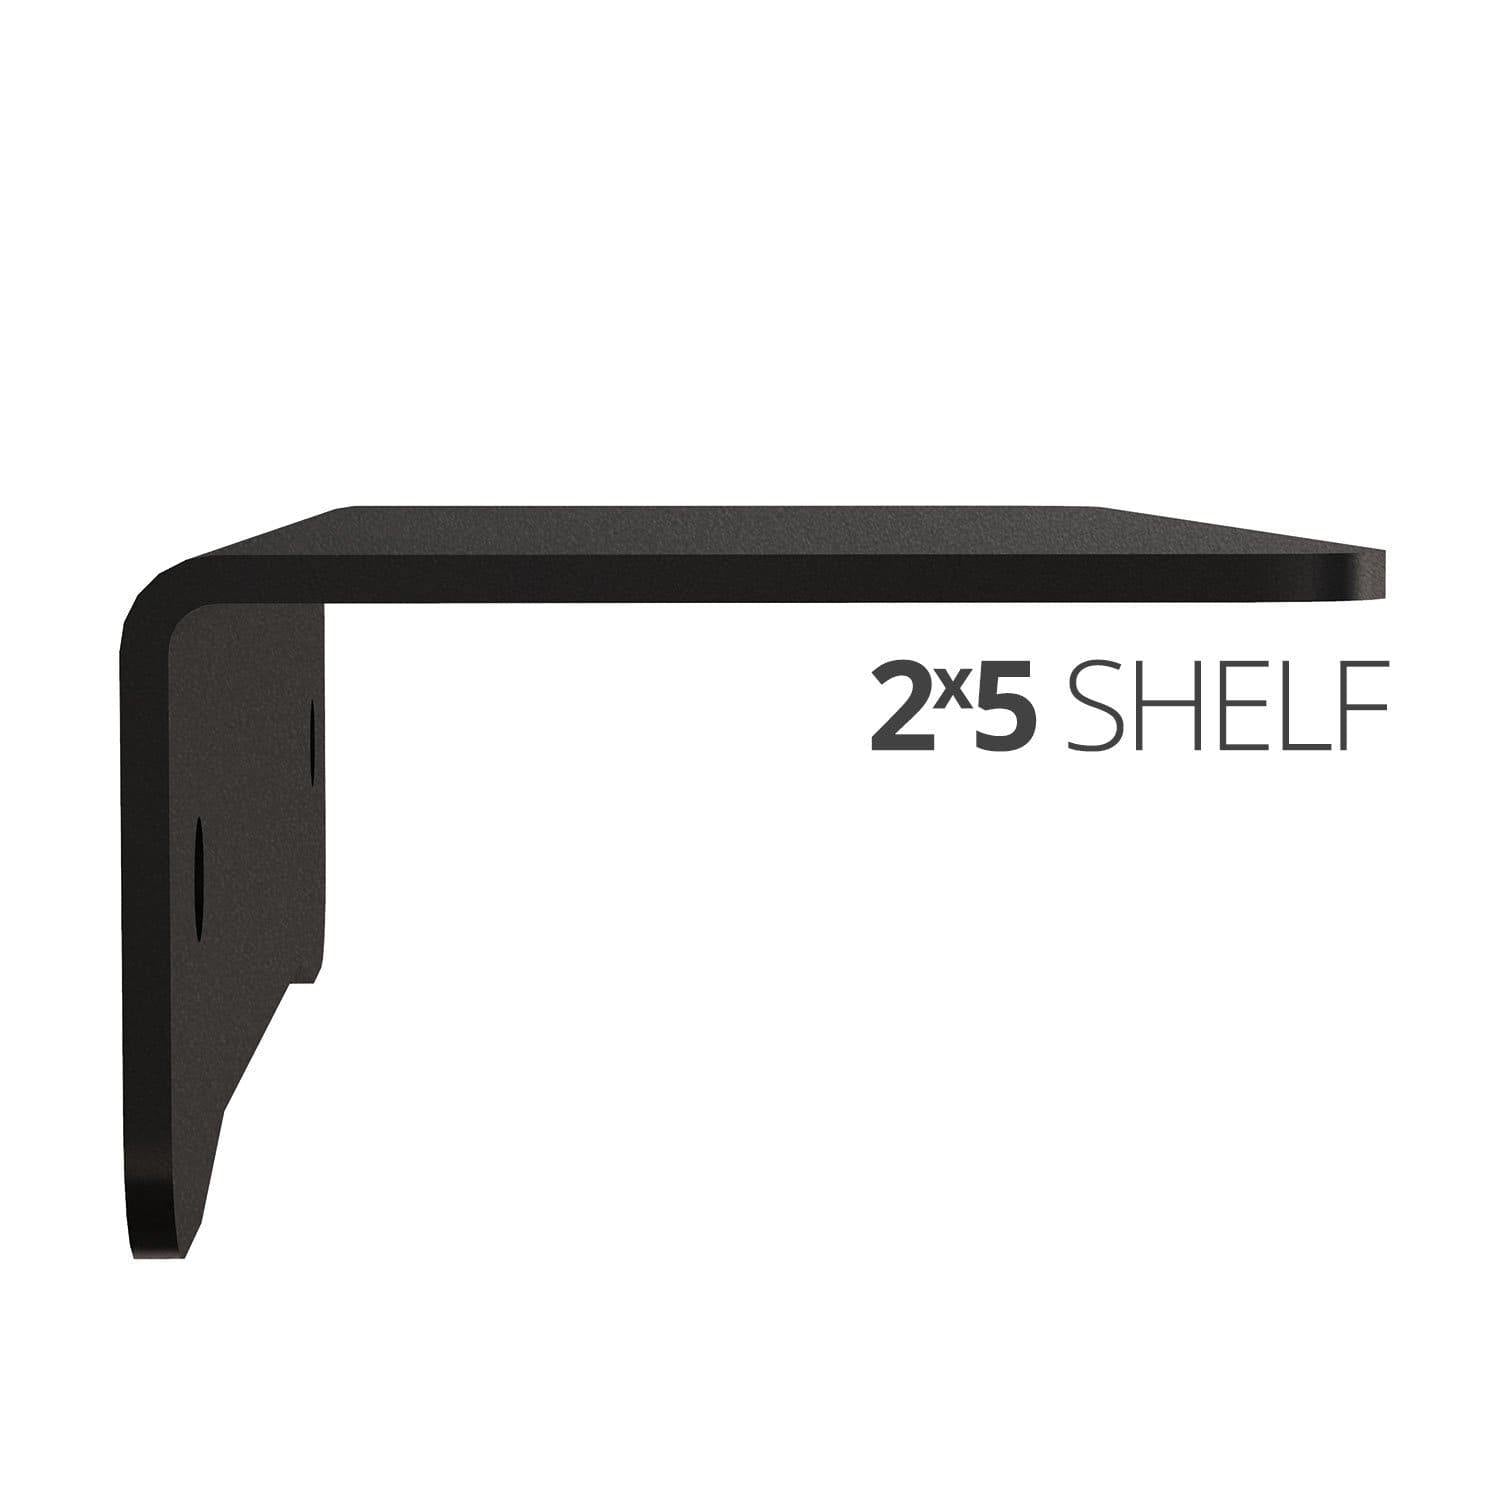 Small wall mounted shelves for home, office and garage - 2x5 side